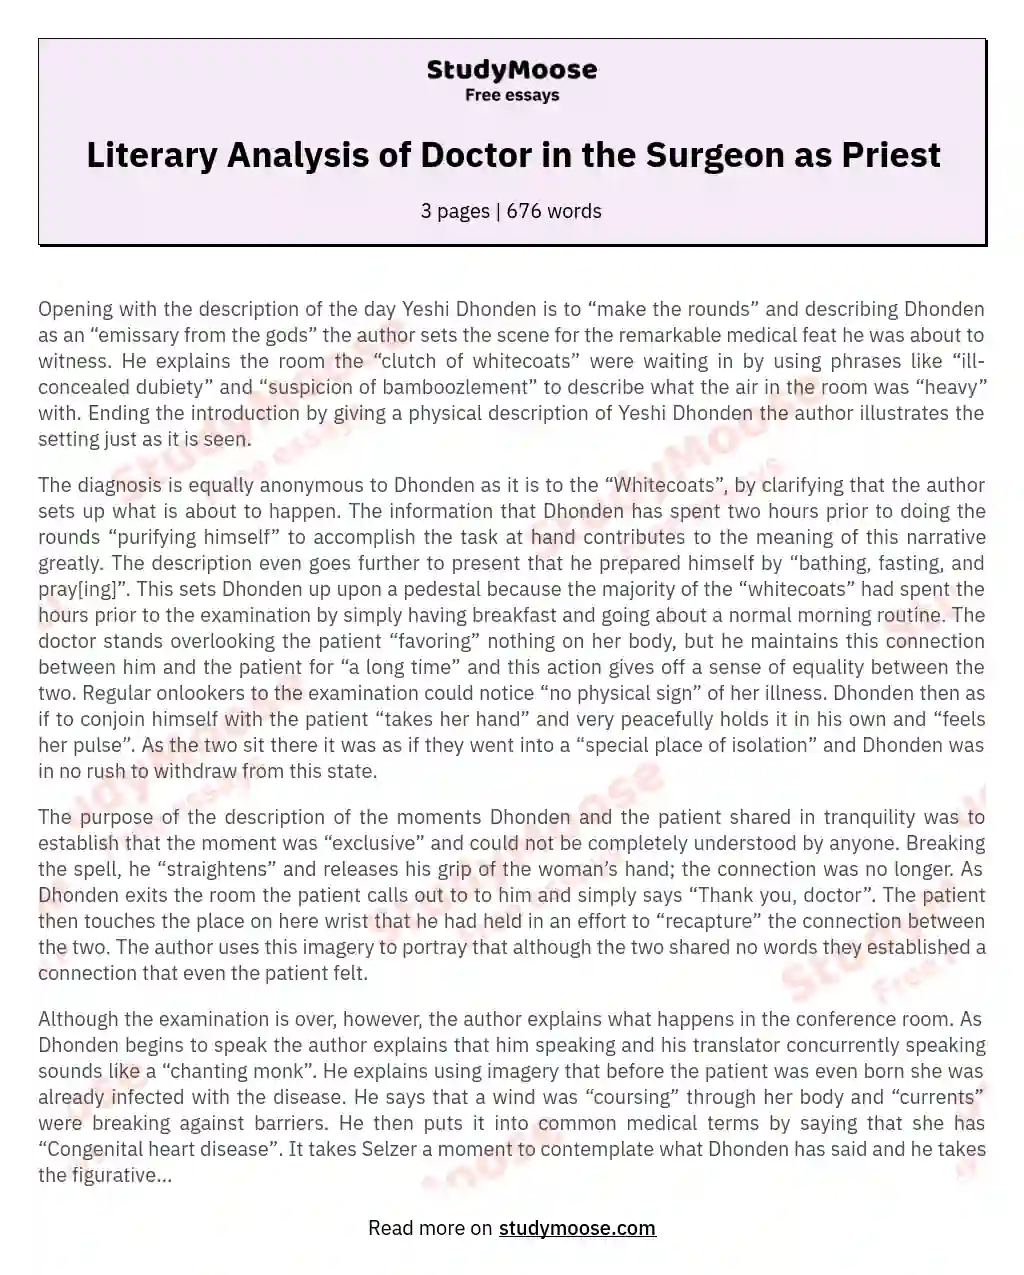 Literary Analysis of Doctor in the Surgeon as Priest